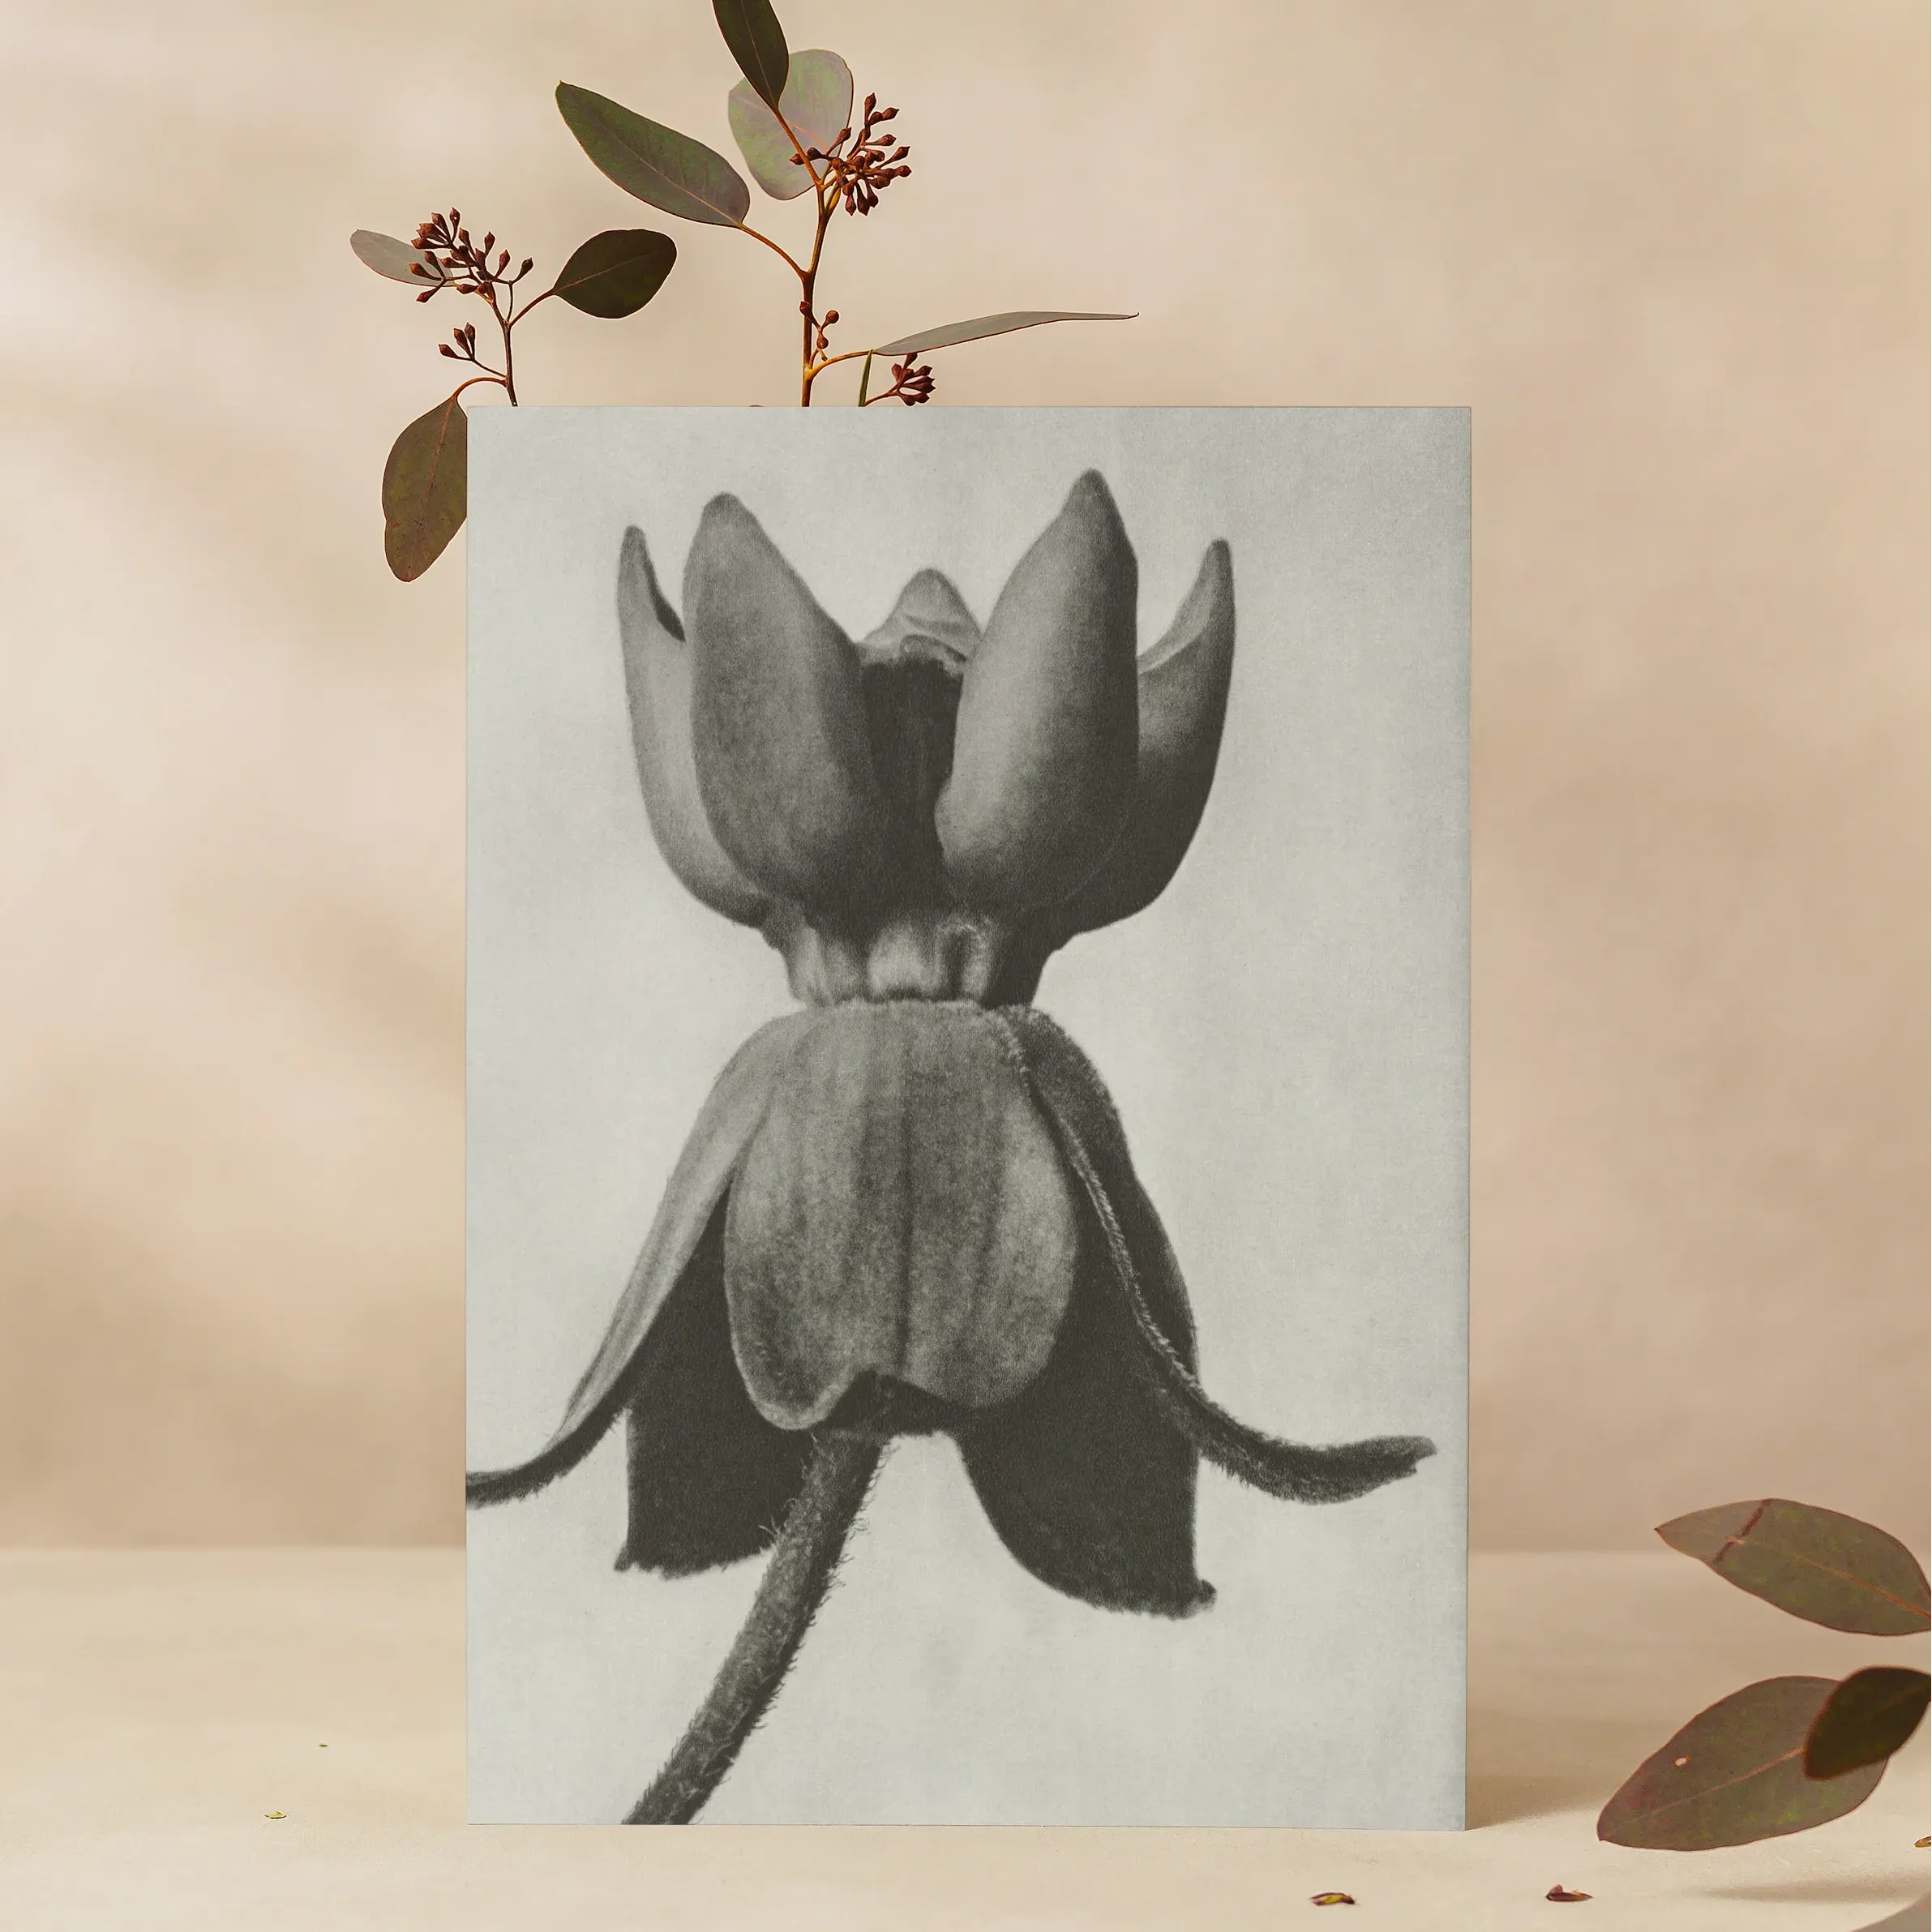 Asclepias Syriaca (common Milkweed) By Karl Blossfeldt Greeting Card - A5 Portrait / 1 Card - Greeting & Note Cards